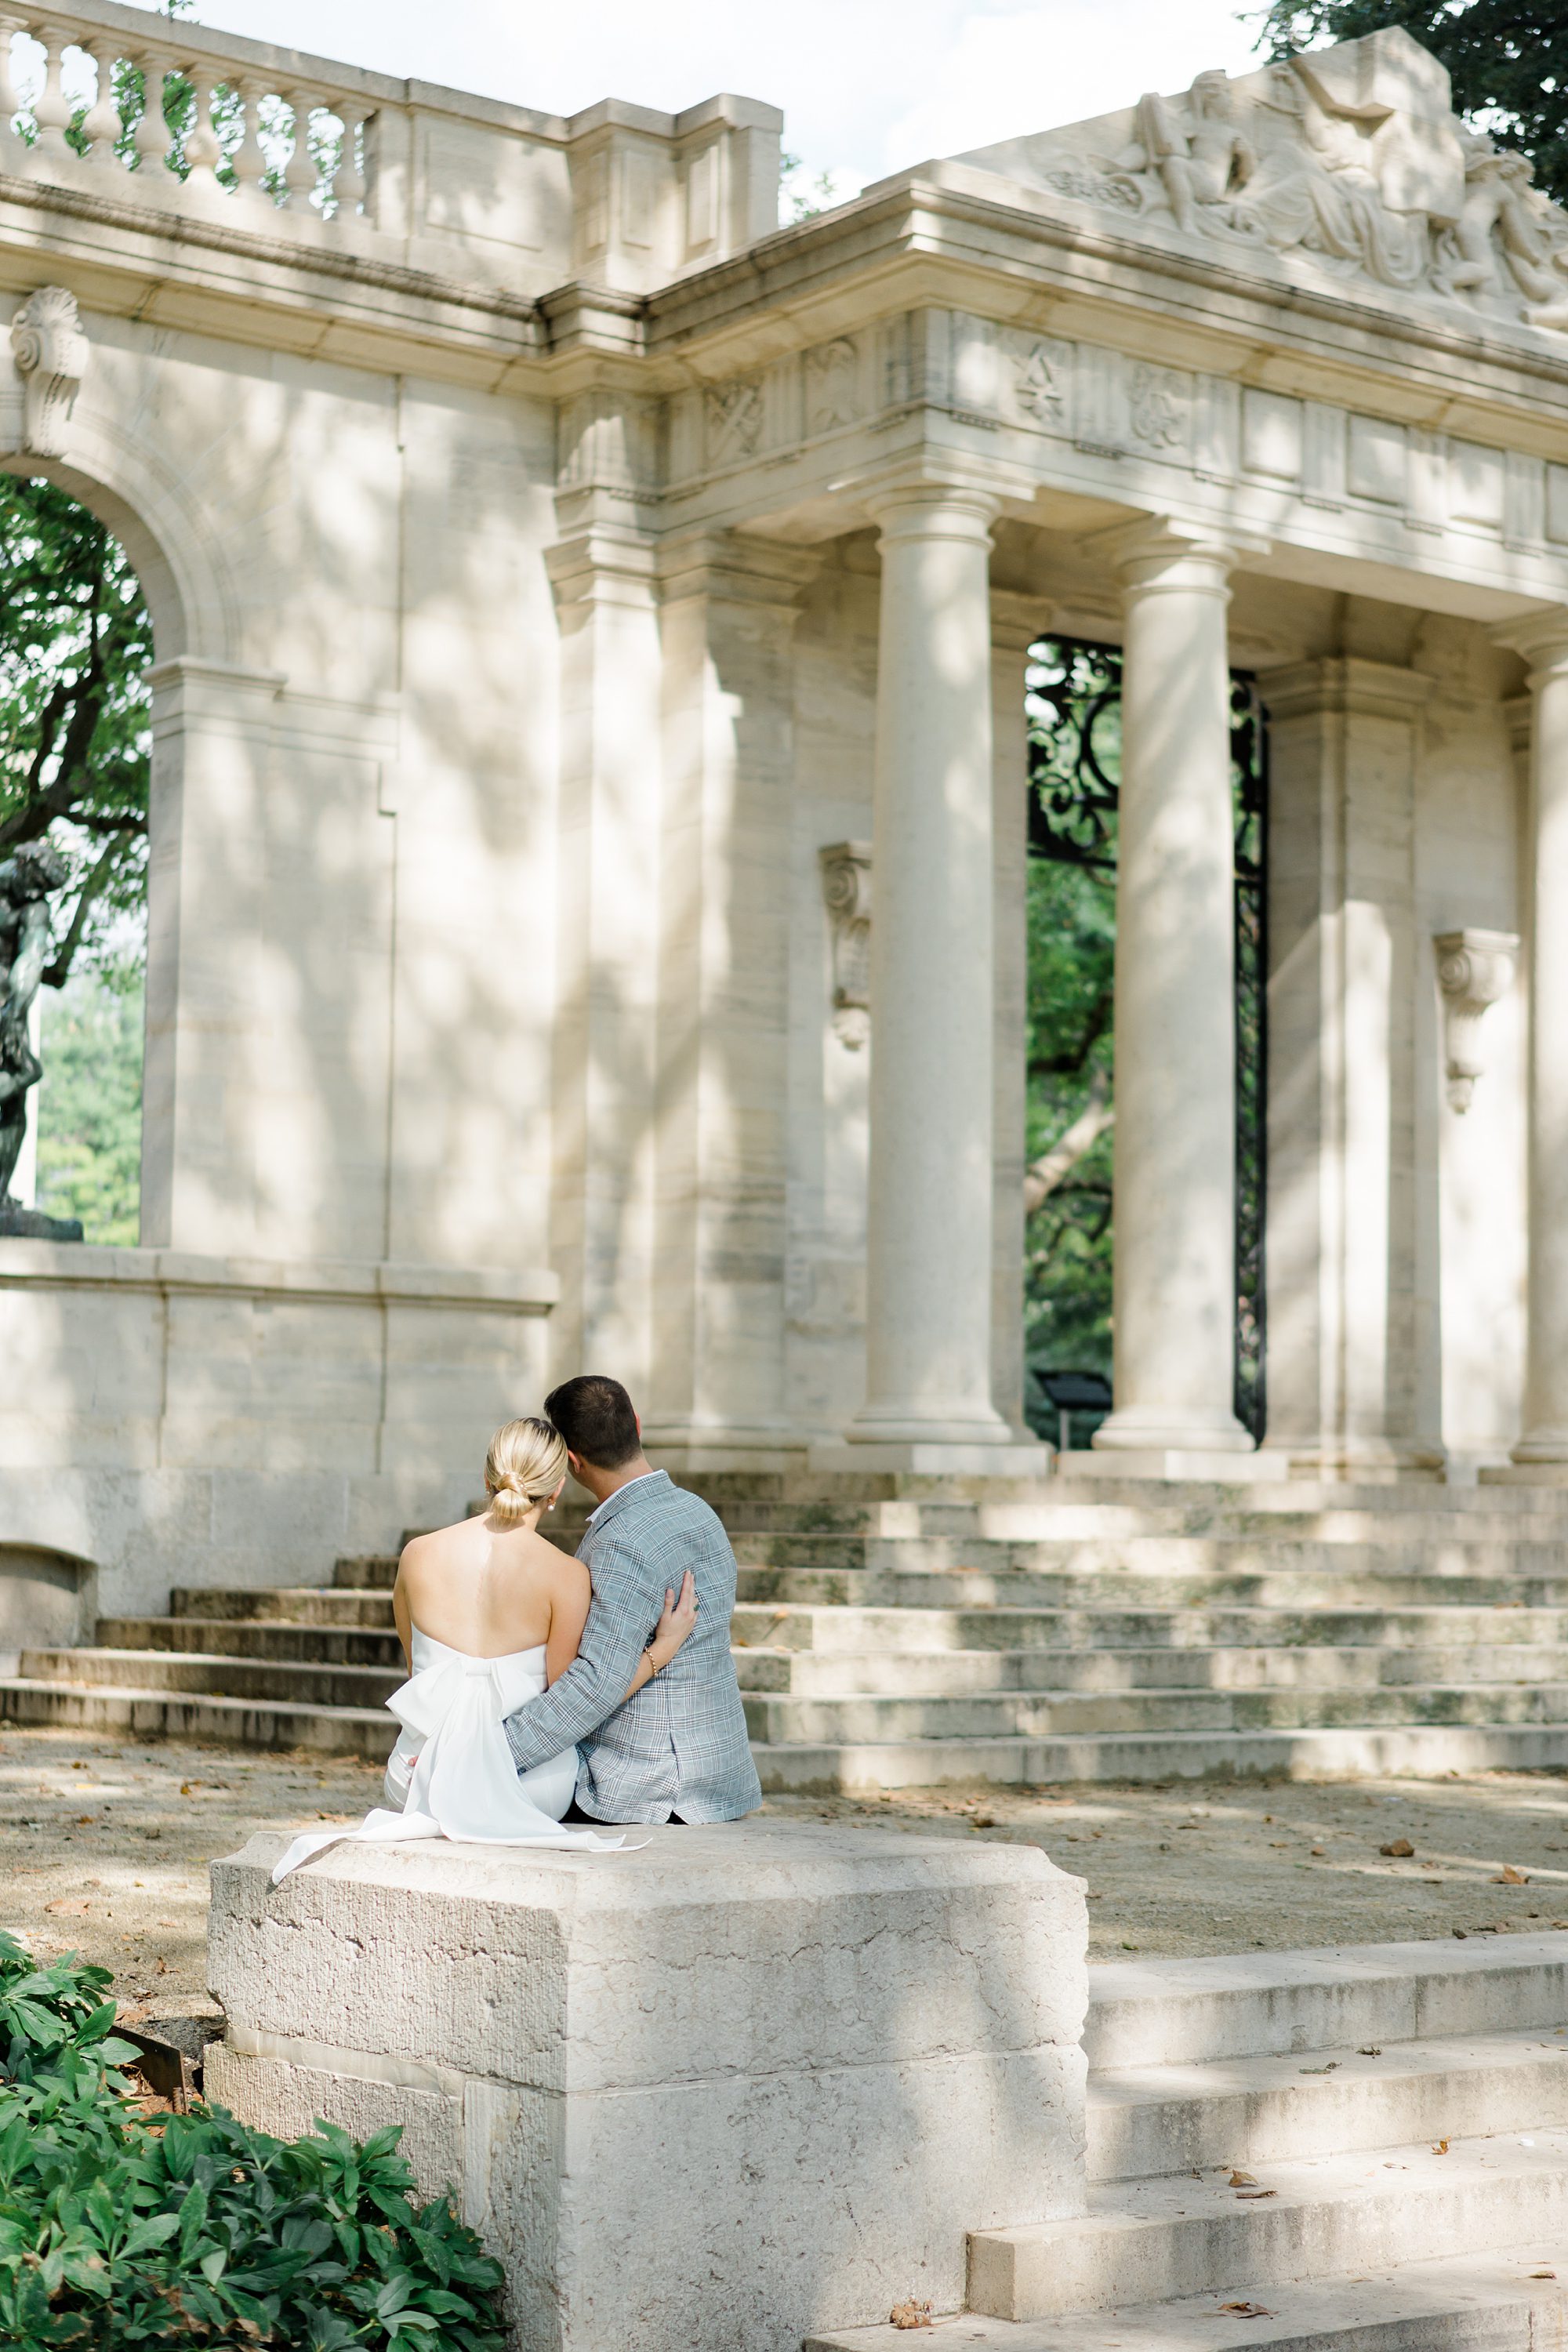 couple sit on stairs during Engagement session at Rodin Museum